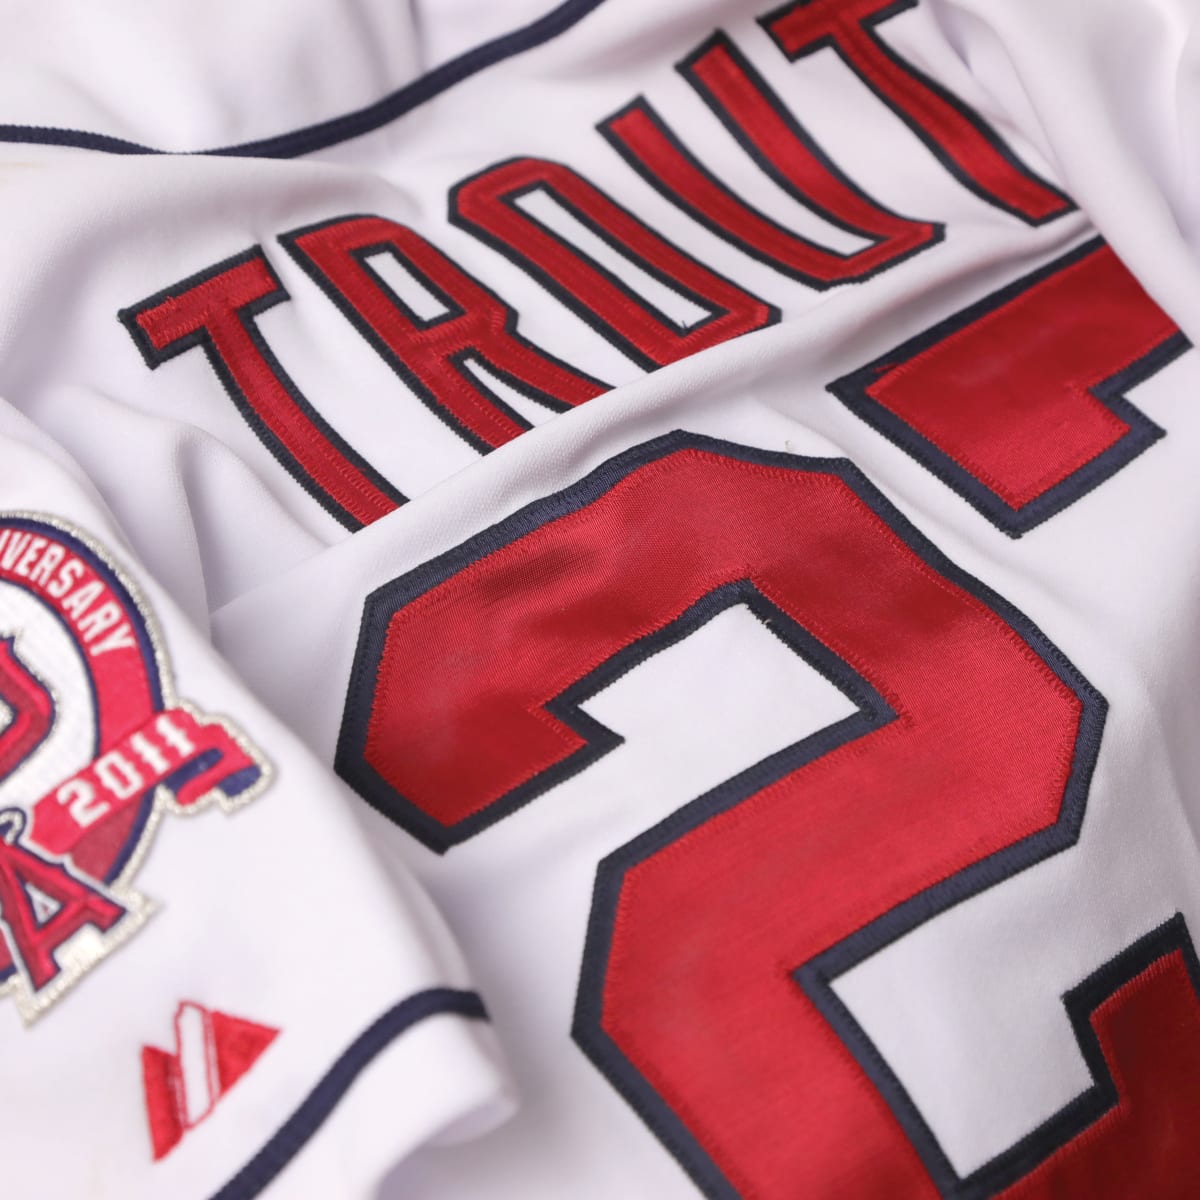 Mike Trout's 1st MLB Jersey Hits Auction Block, Should Sell For Over $1 Mil!